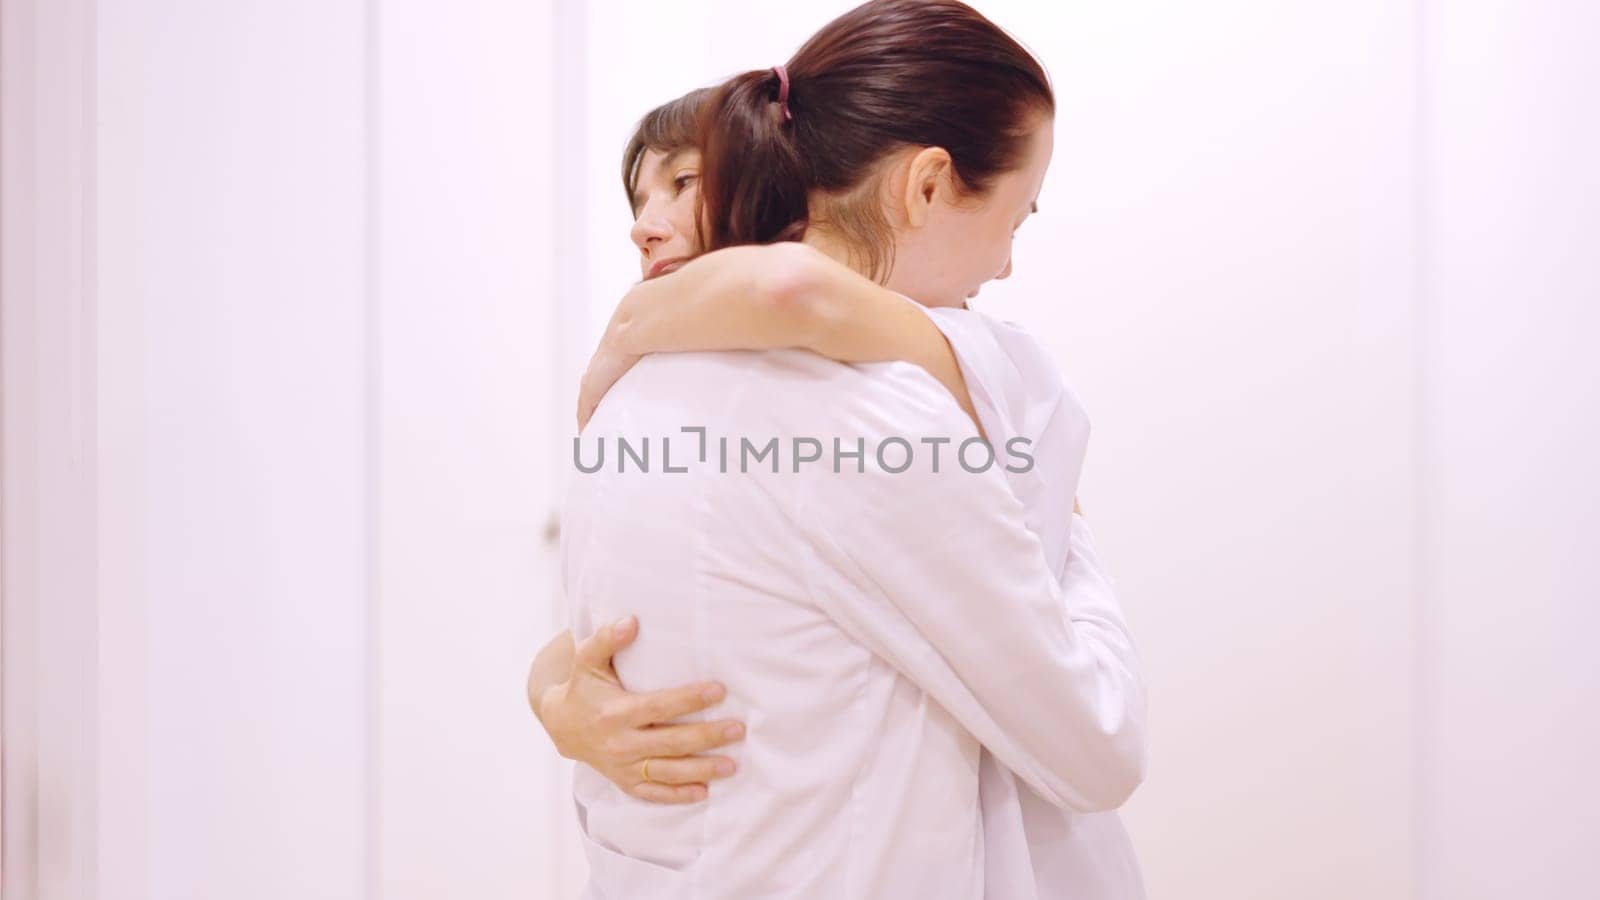 Doctor crying receives a hug and support from her coworker by ivanmoreno